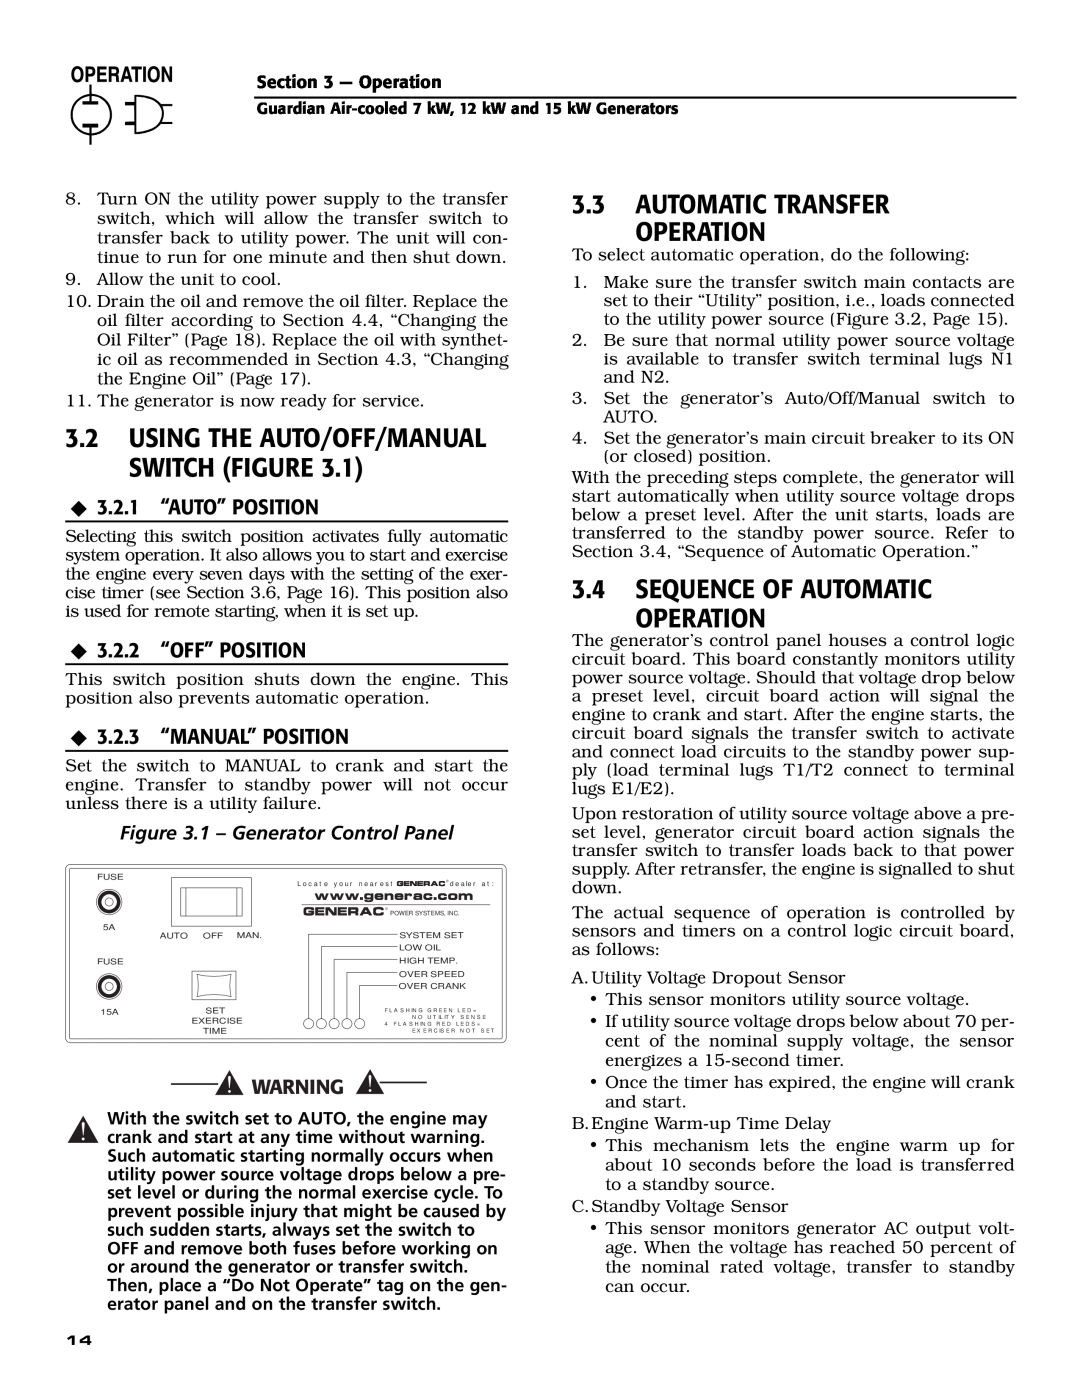 Generac Power Systems 04759-0 Automatic Transfer Operation, Sequence Of Automatic Operation, ‹ 3.2.1 “AUTO” POSITION 